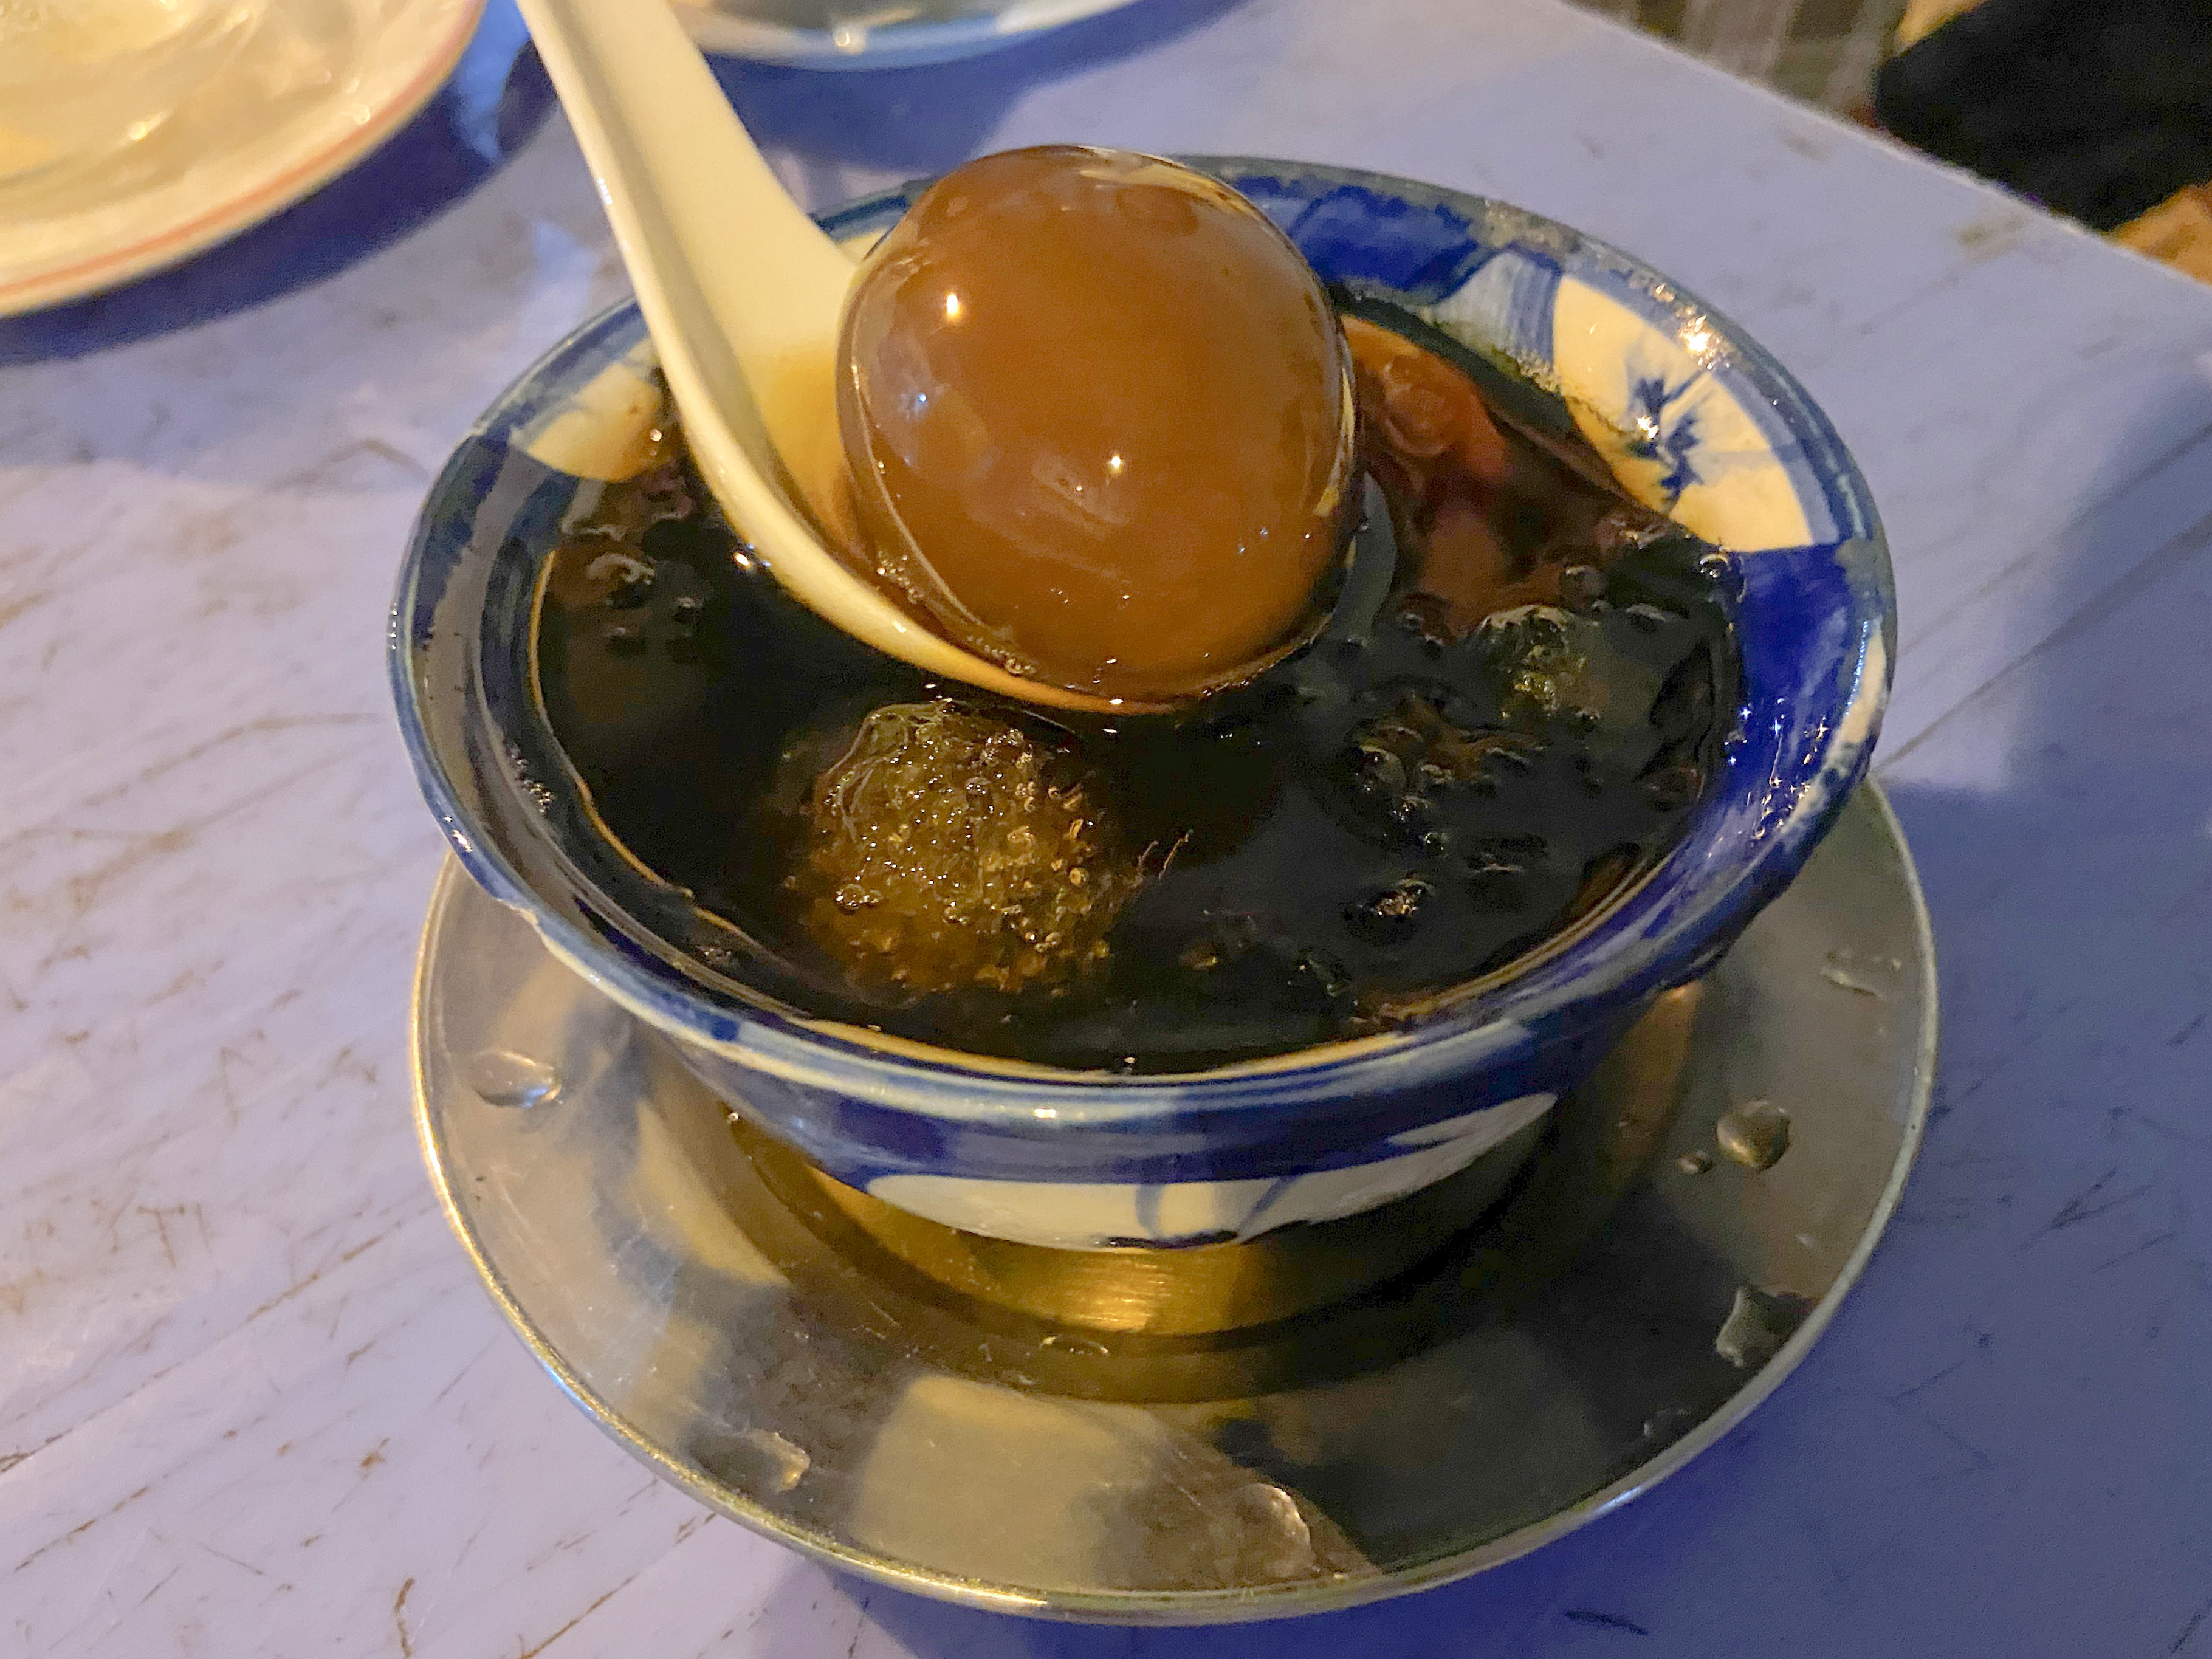 A serving of Chinese tea egg sweet soup from Chau Giang sweet dessert stall, Tran Hung Dao B Street, District 5, Ho Chi Minh City. Photo: Linh To / Tuoi Tre